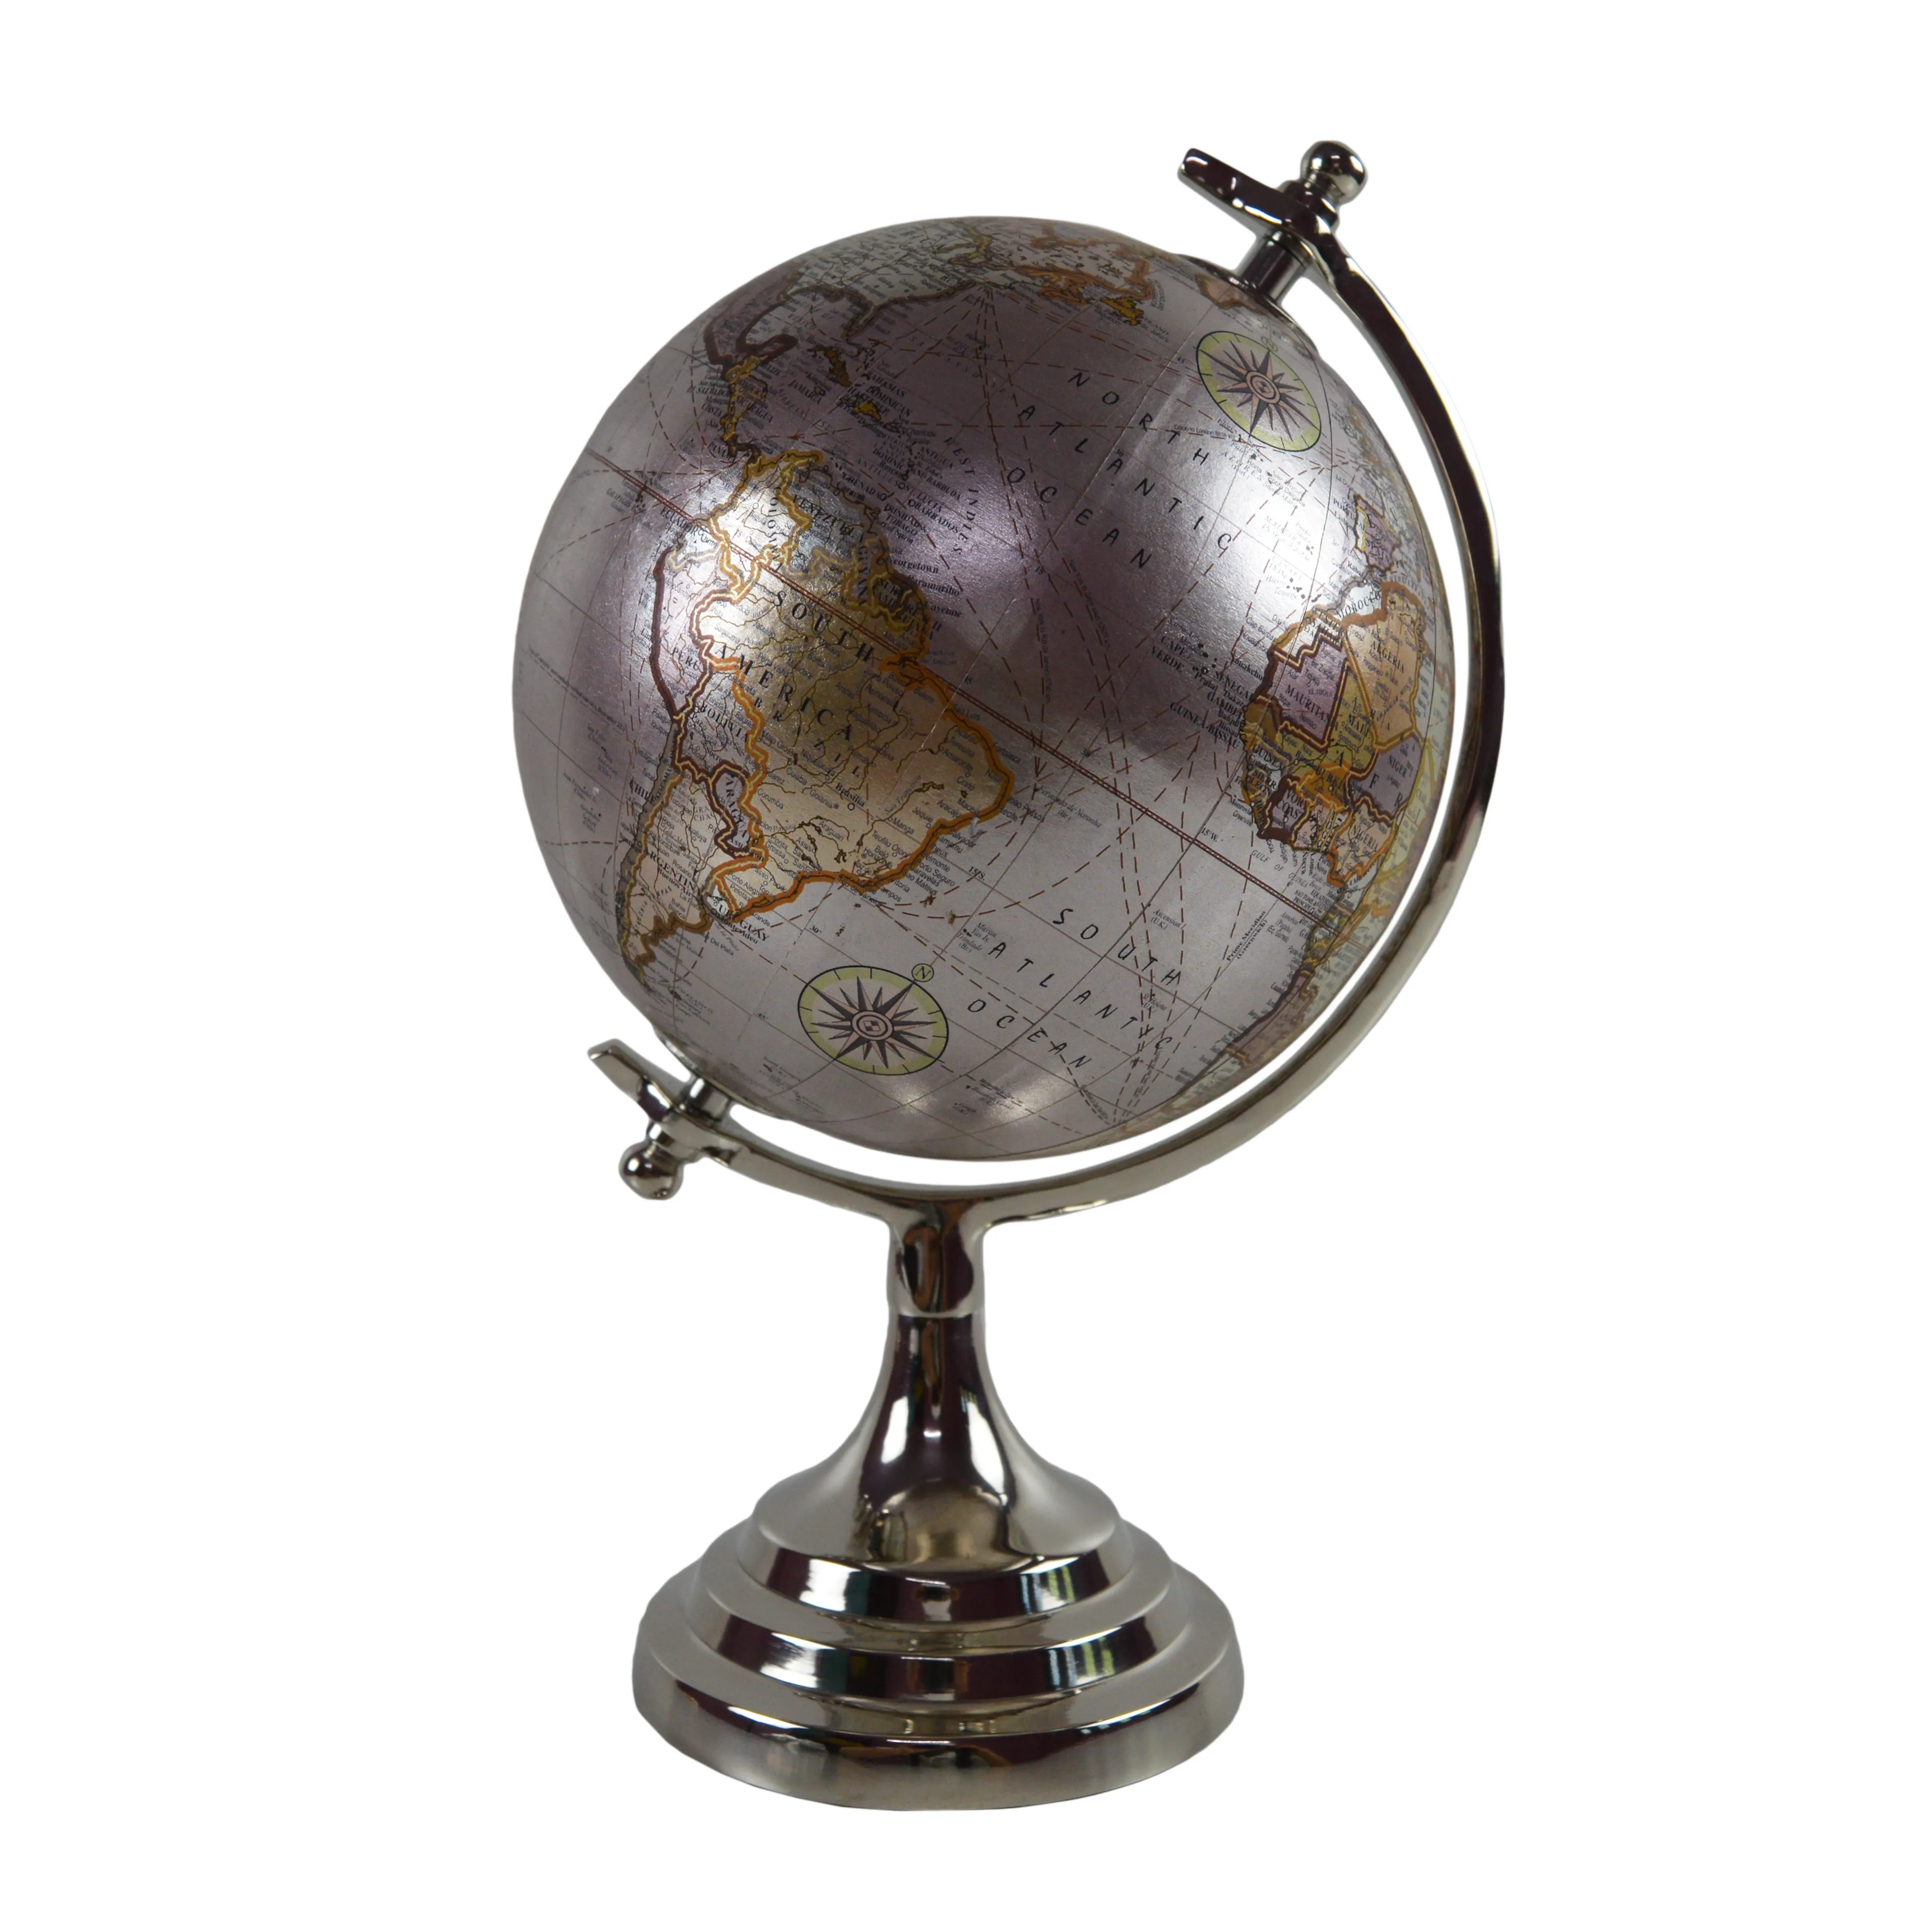 Trending Modern Theme Office Design World Map Metal Globe With Stand For Tableware Office Lab And School Designs Geography